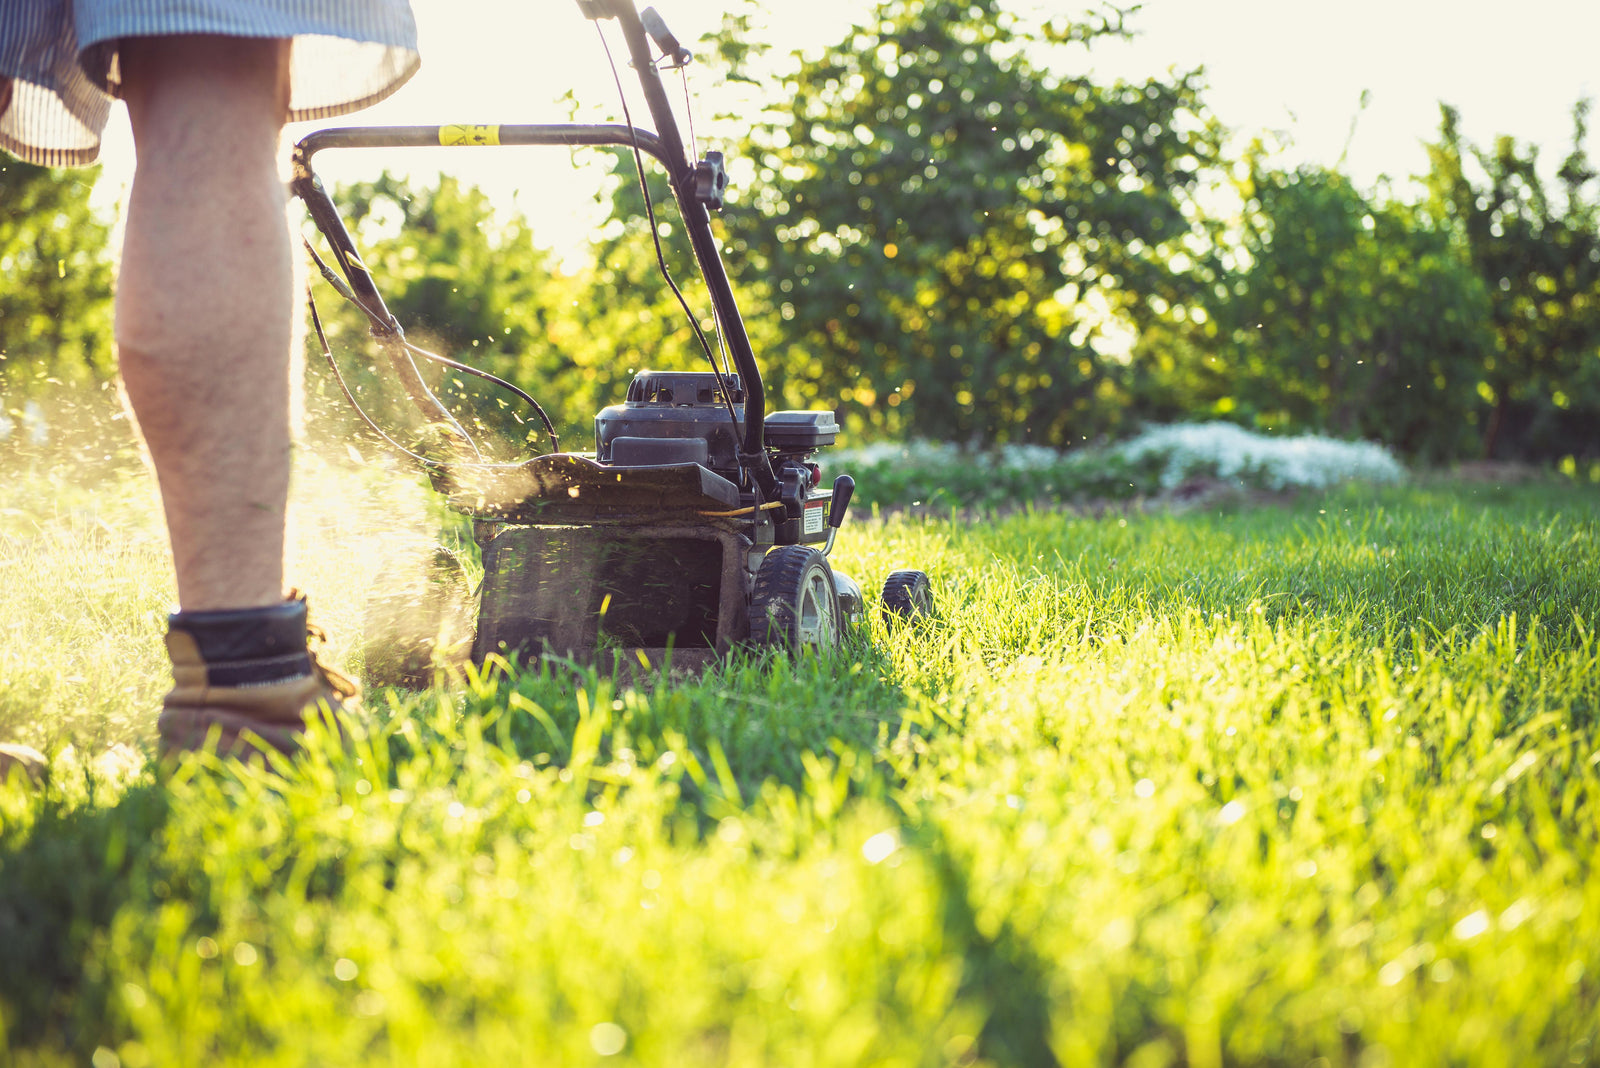 Father's Day Gifts: Practical Ideas for Yard Work and Irrigation